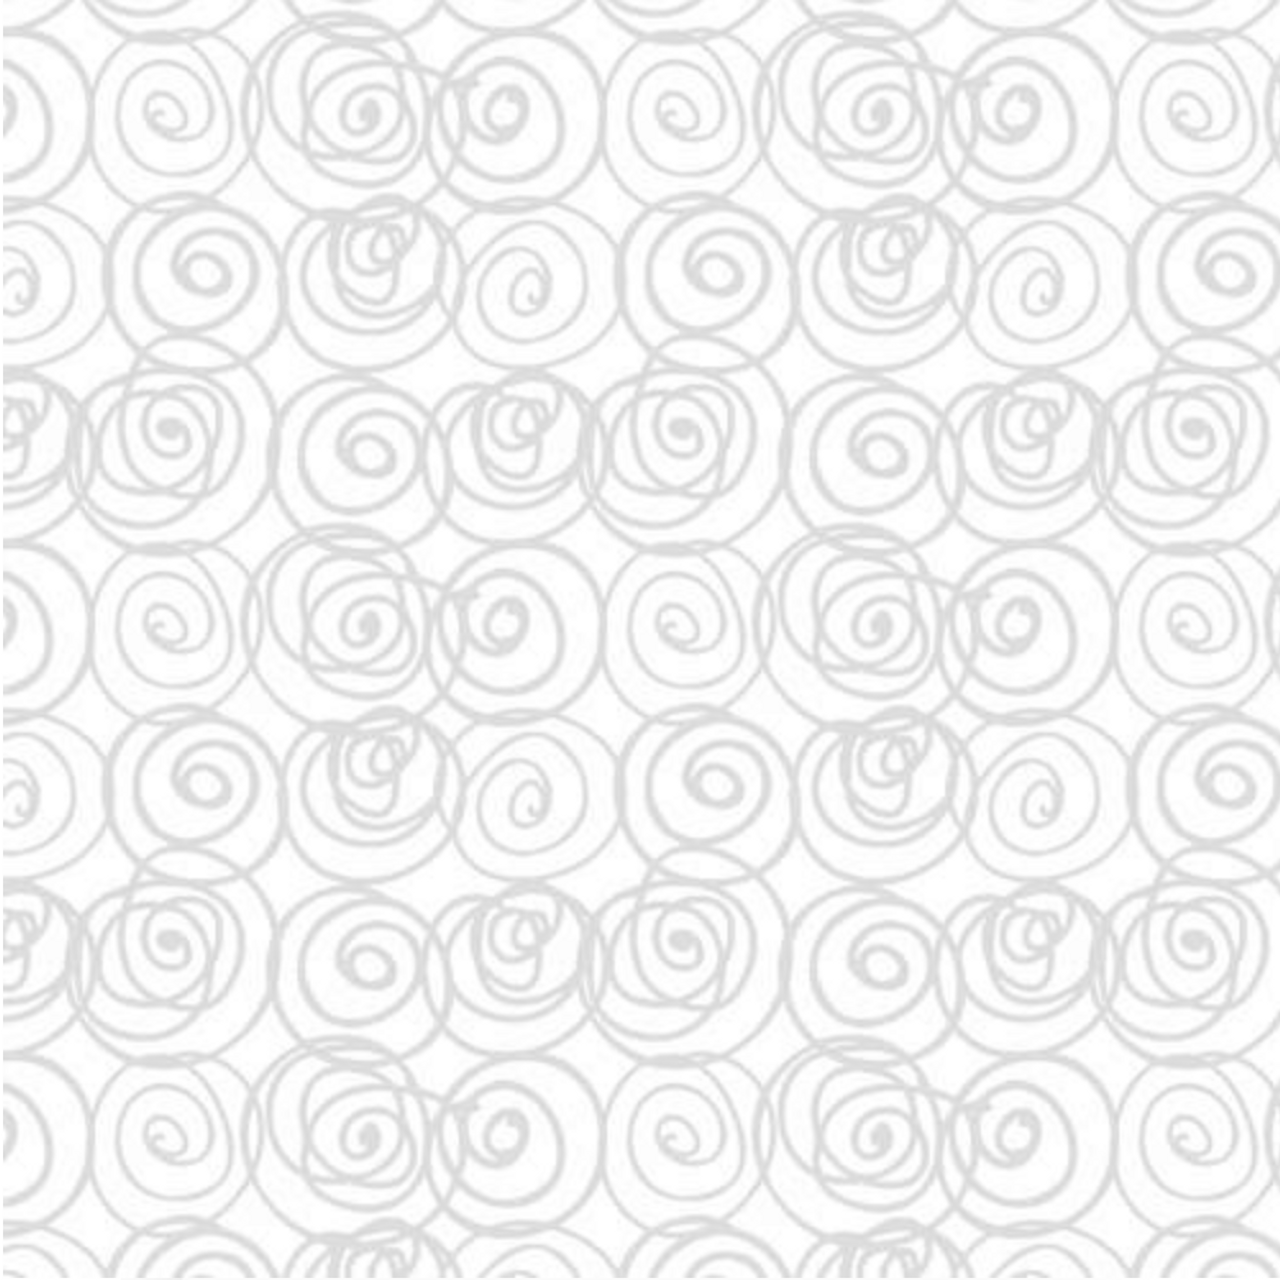 Blank Quilting Morning Mist VI Circles White Cotton Fabric By The Yard